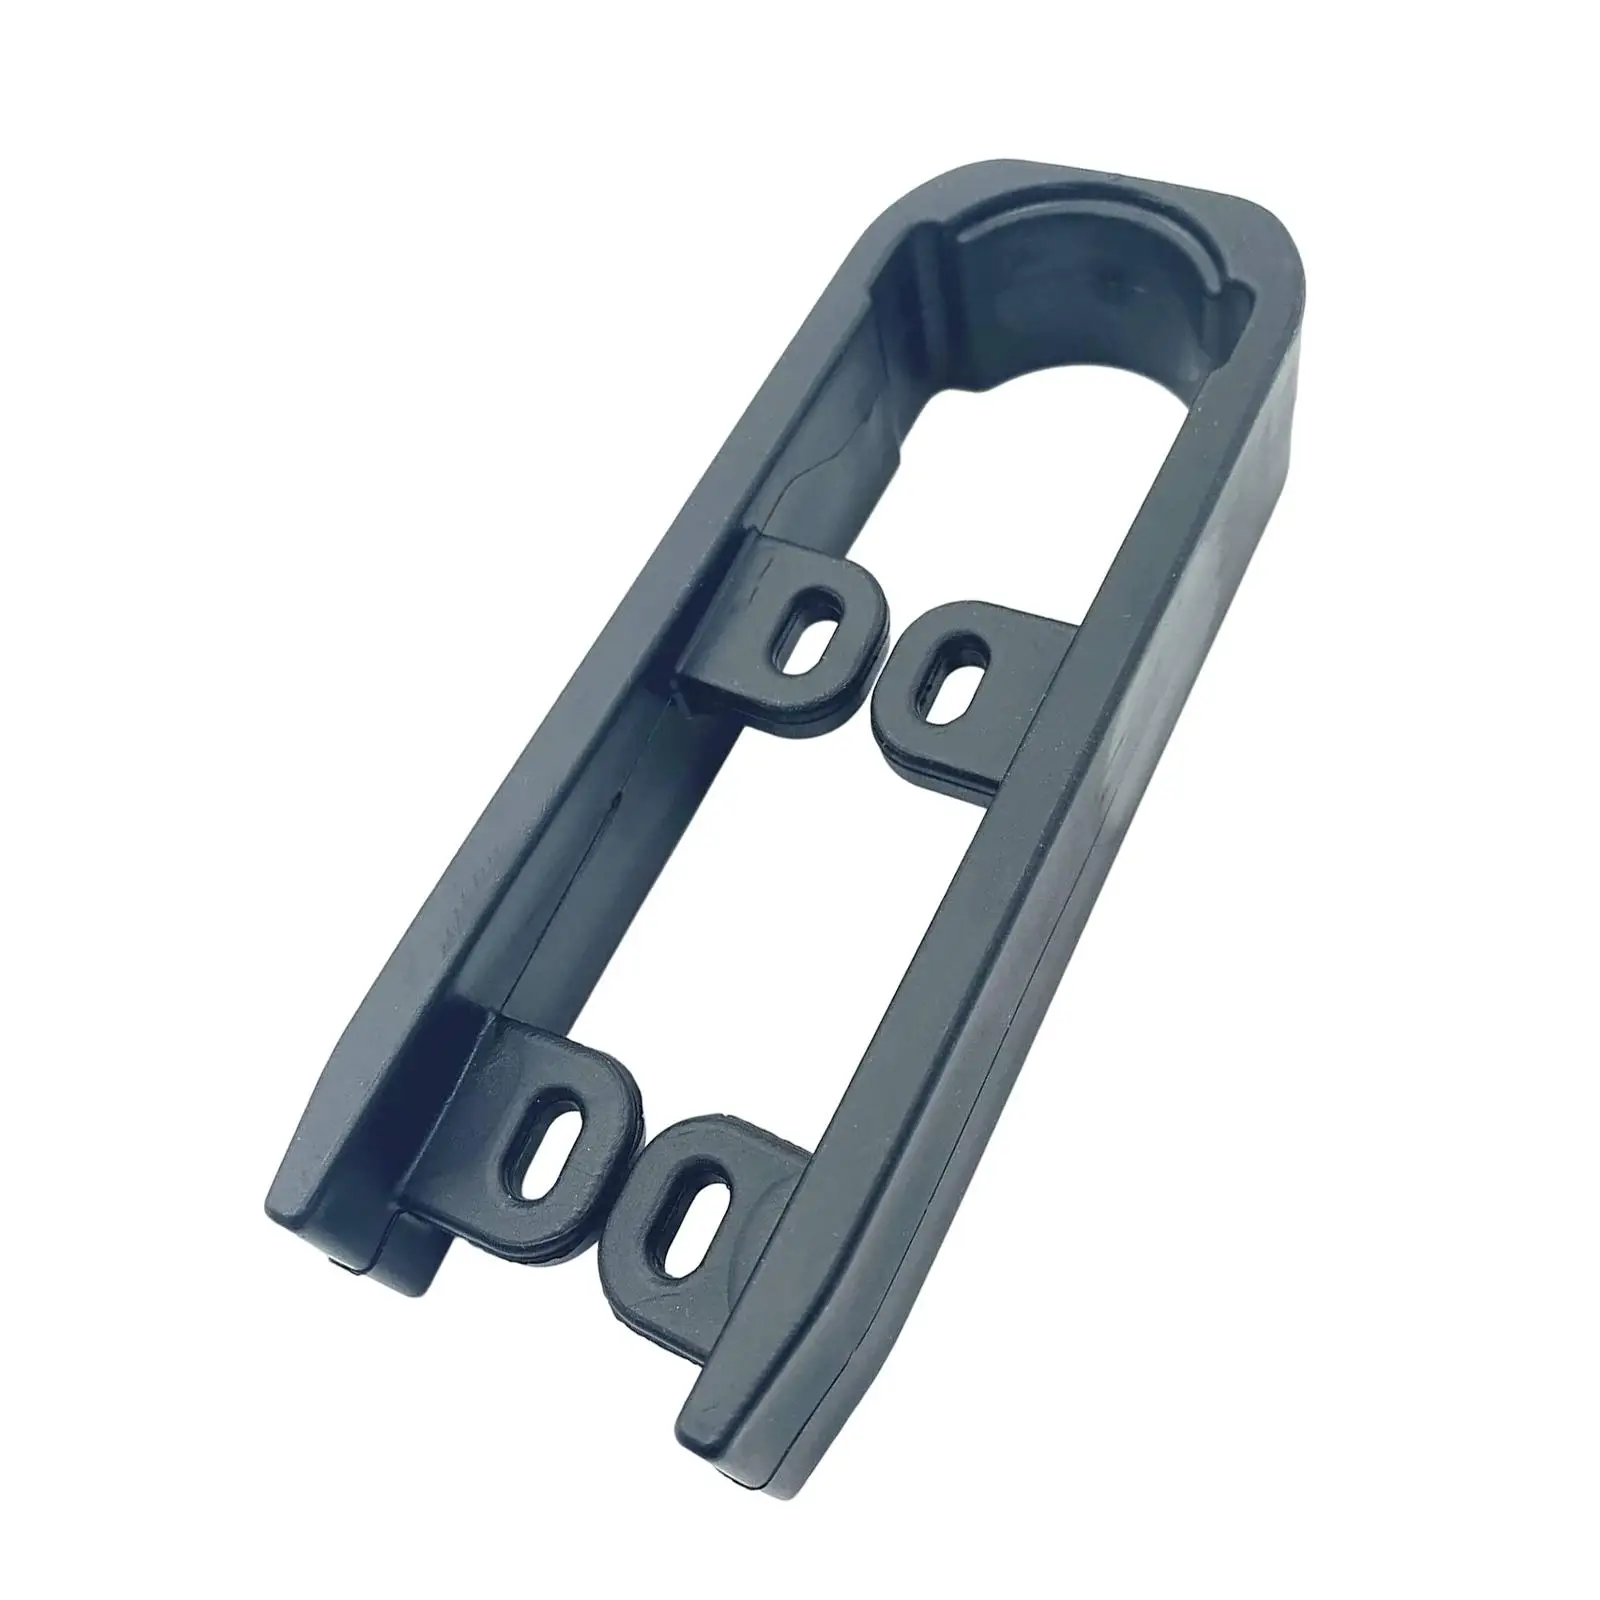 Rear Swing Arm Slider Chain 5435676-070 for 500 ATV 04-07 Accessories Replaces Durable Spare Parts